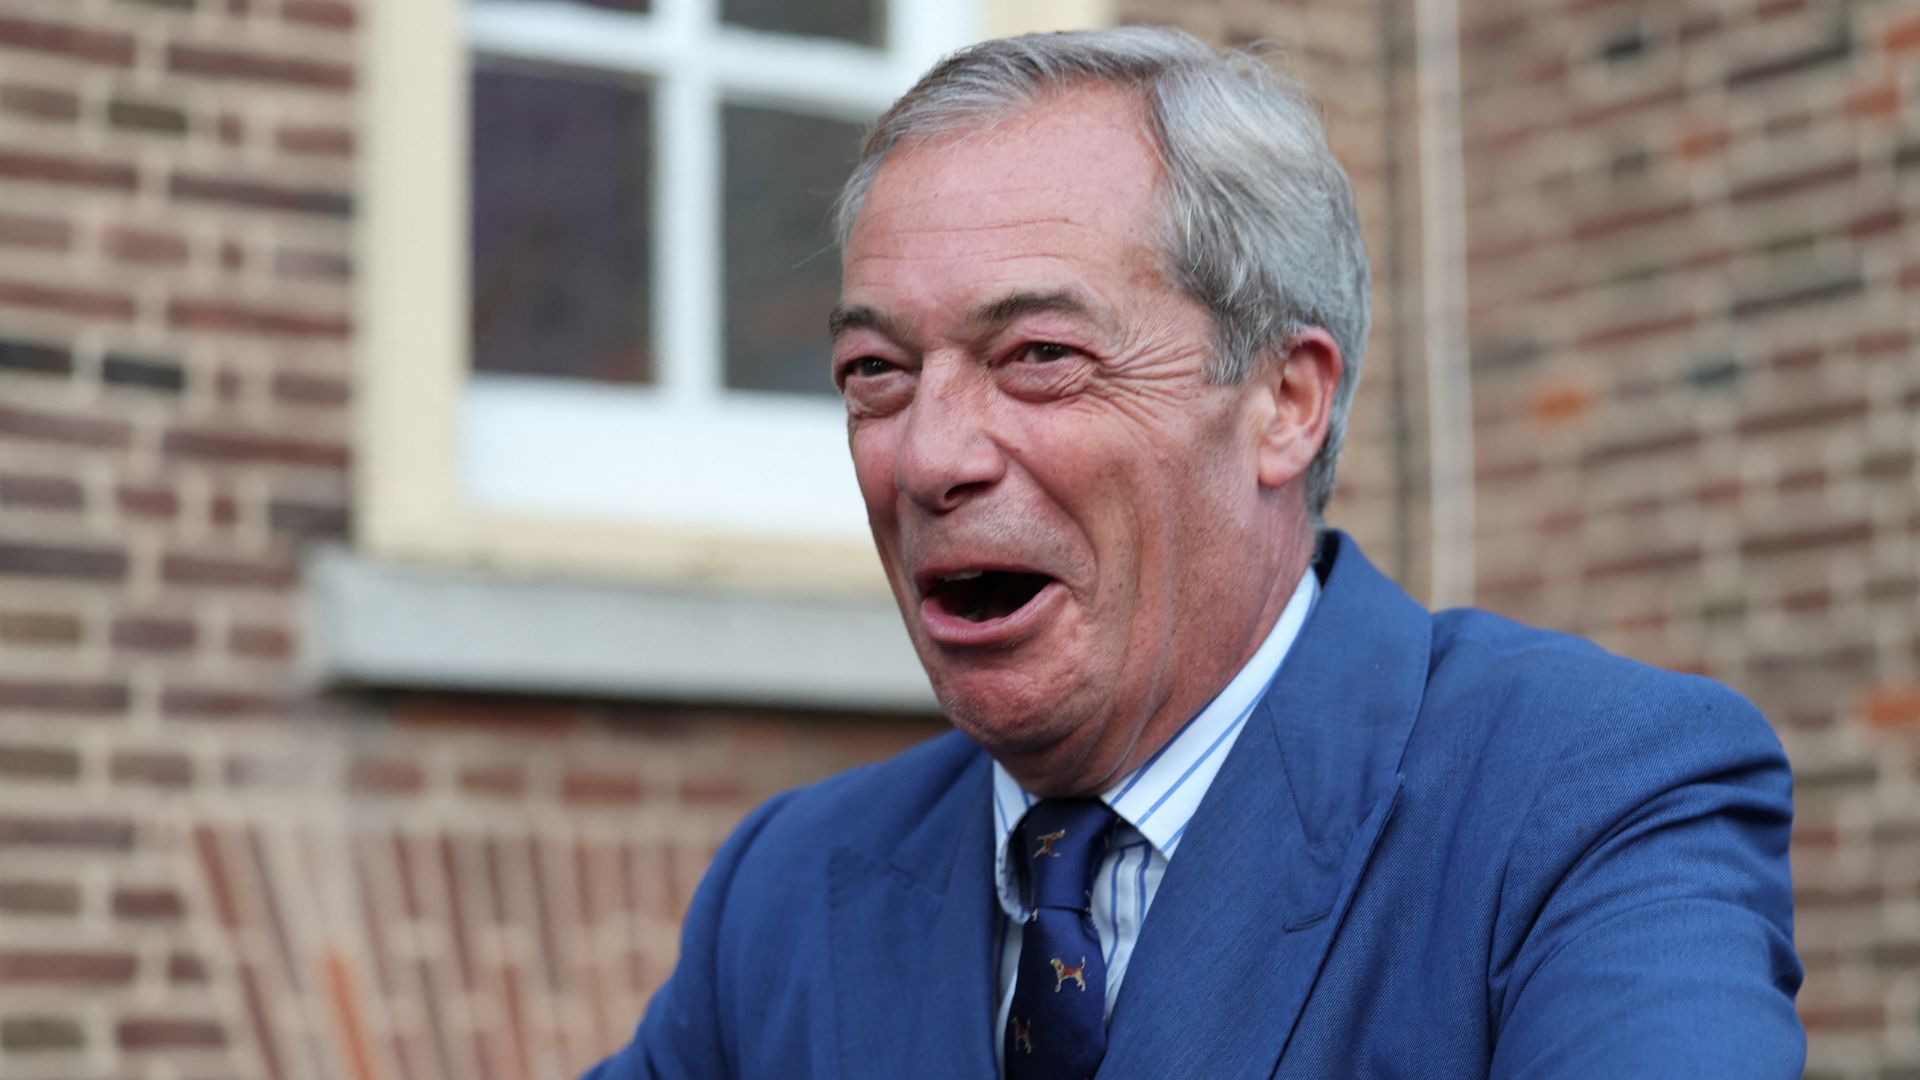 Britain's Reform UK Party Leader Nigel Farage reacts following a campaign event in Clacton-on-Sea. /Isabel Infantes/Reuters